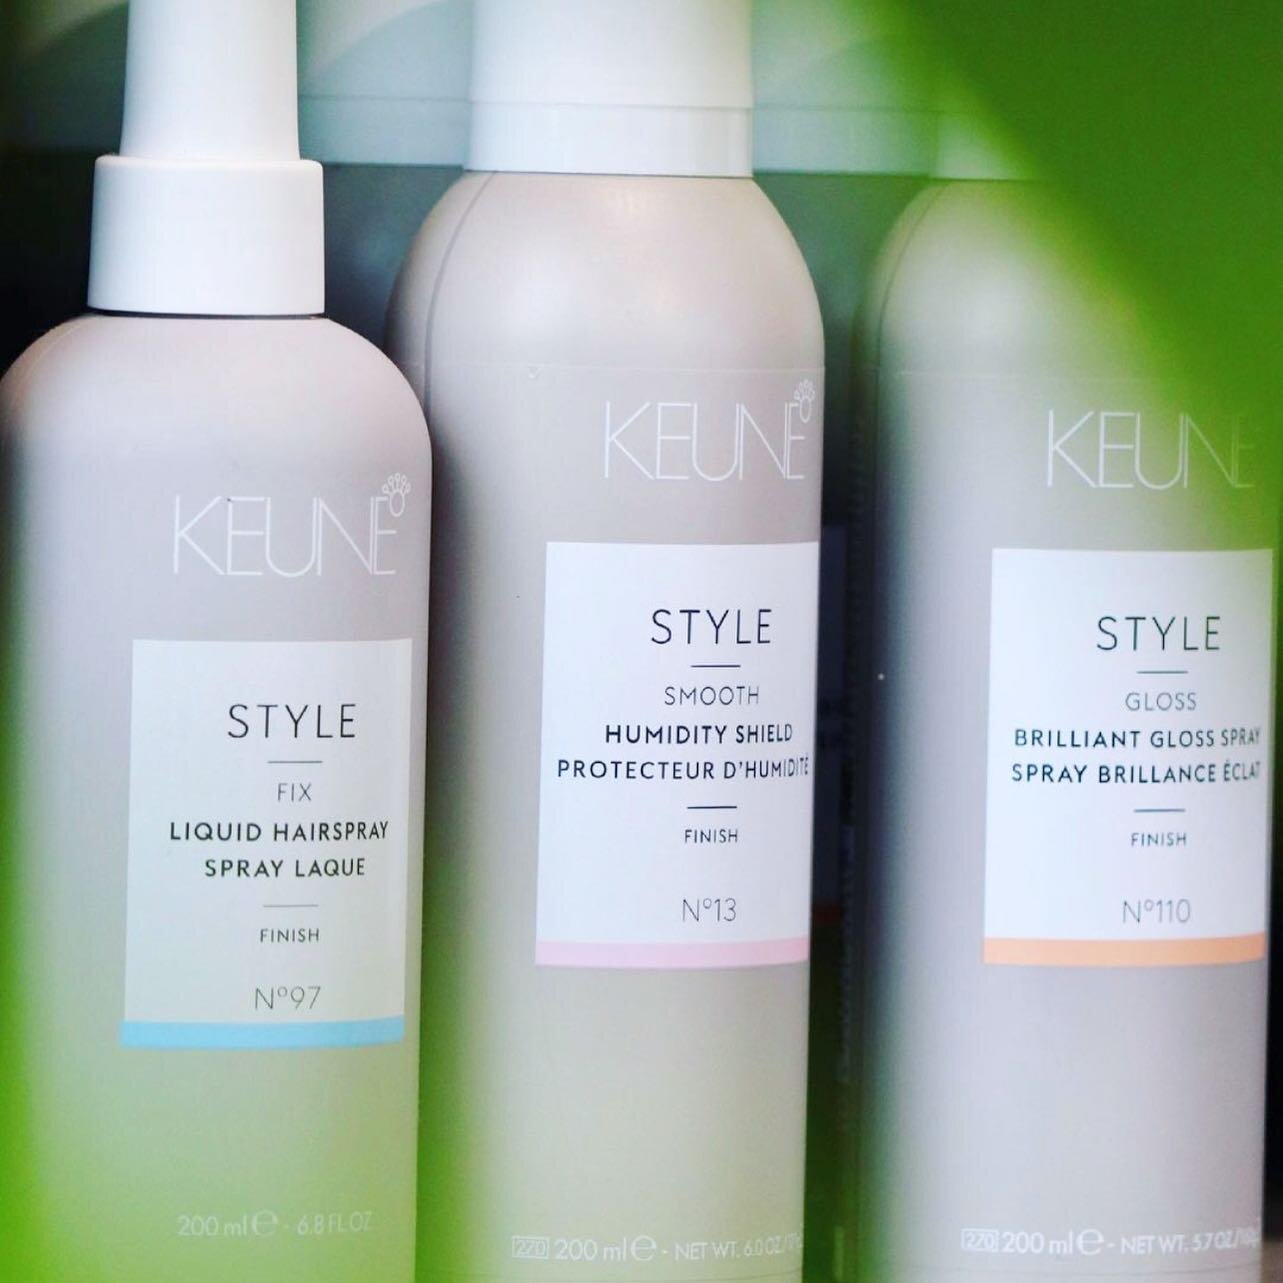 Hair products are a girls best friend ✨ 

Stop in and grab some amazing products here by @keunenamerica. We have so many of Keunes amazing products from our AMAZING silver savior purple shampoo to liquid hairspray! Shop now at @thebeautybardesignstud